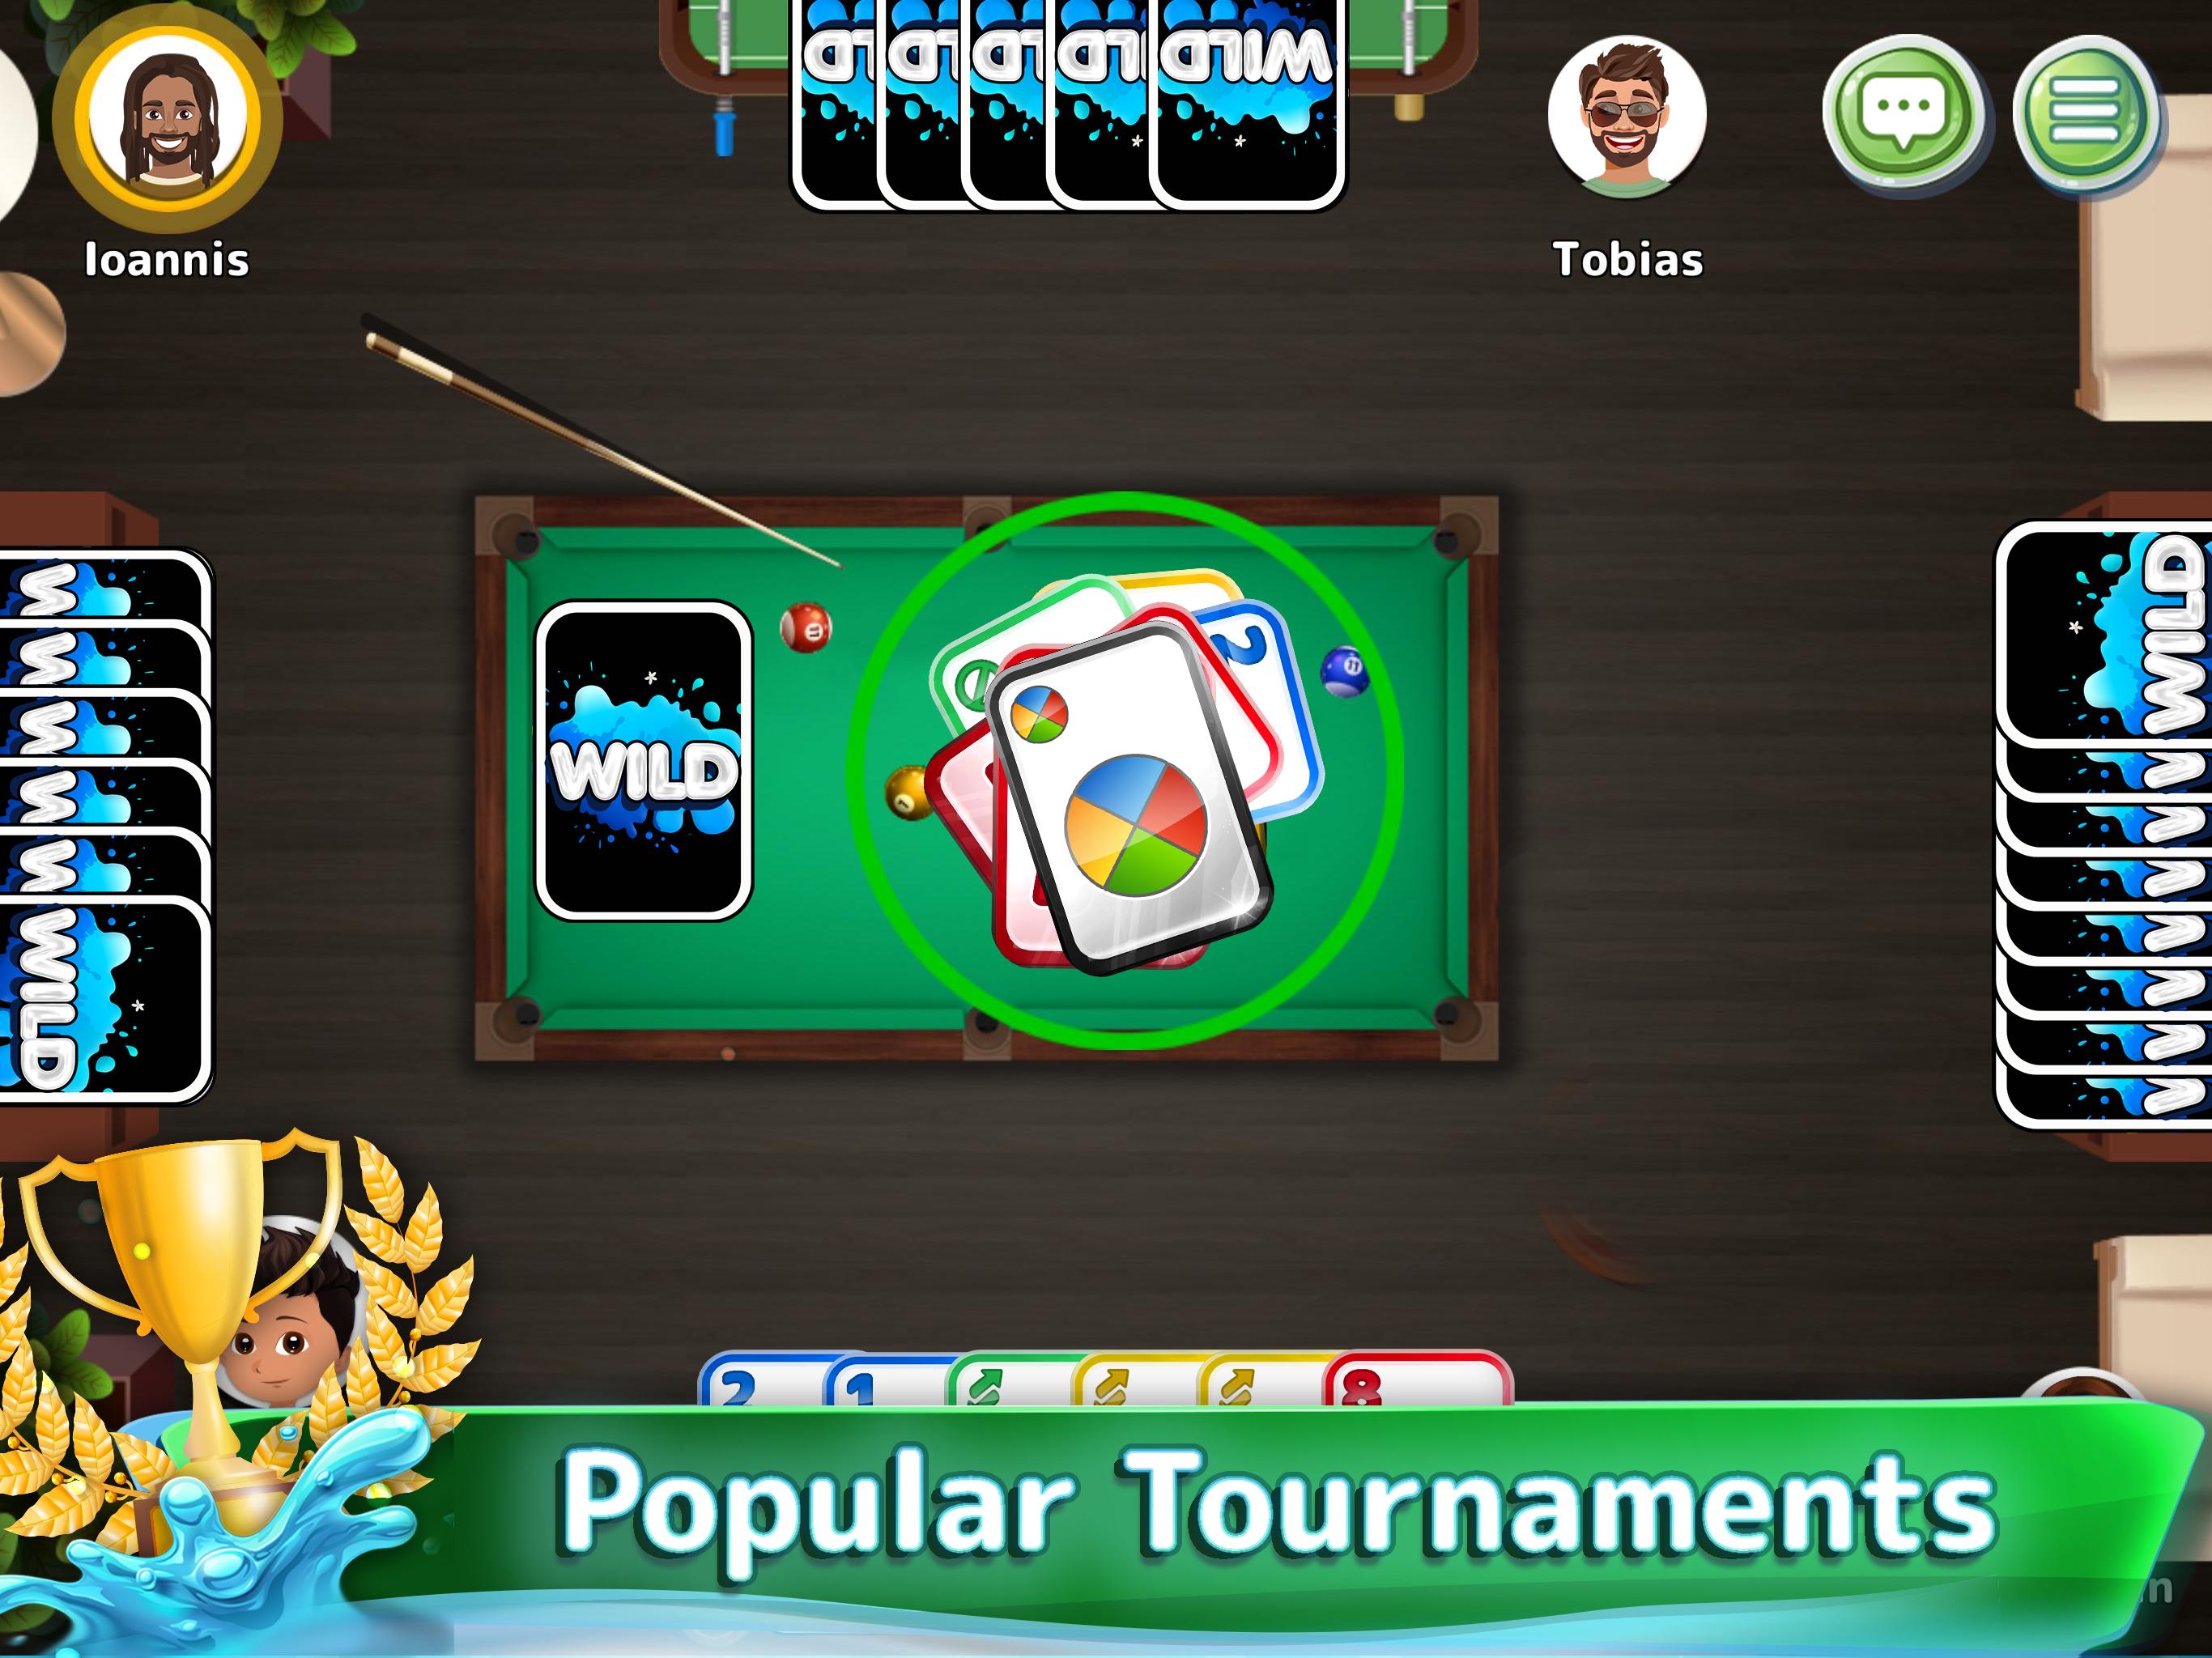 WILD CARDS Online: Multiplayer Games with Friends 3.0.22 Screenshot 10